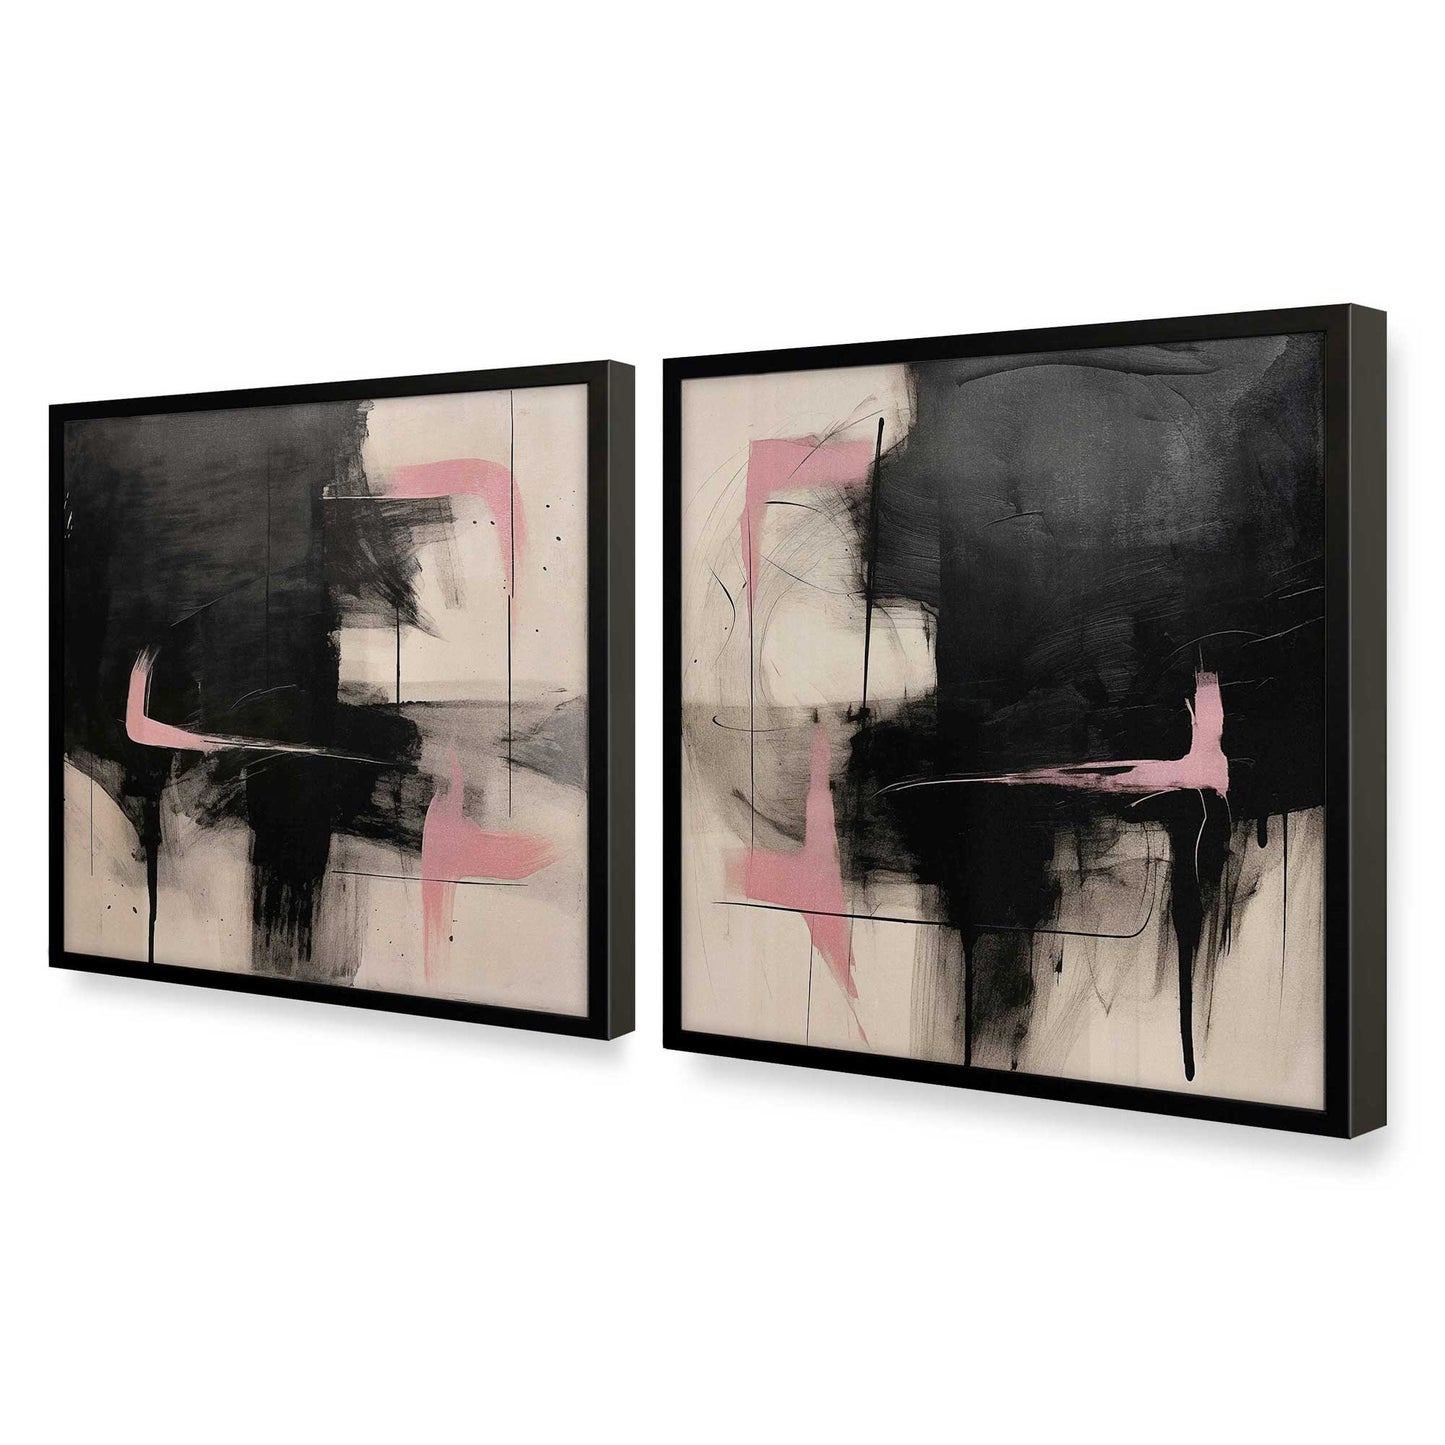 [Color:Satin Black] Picture of art in a Satin Black frame at an angle